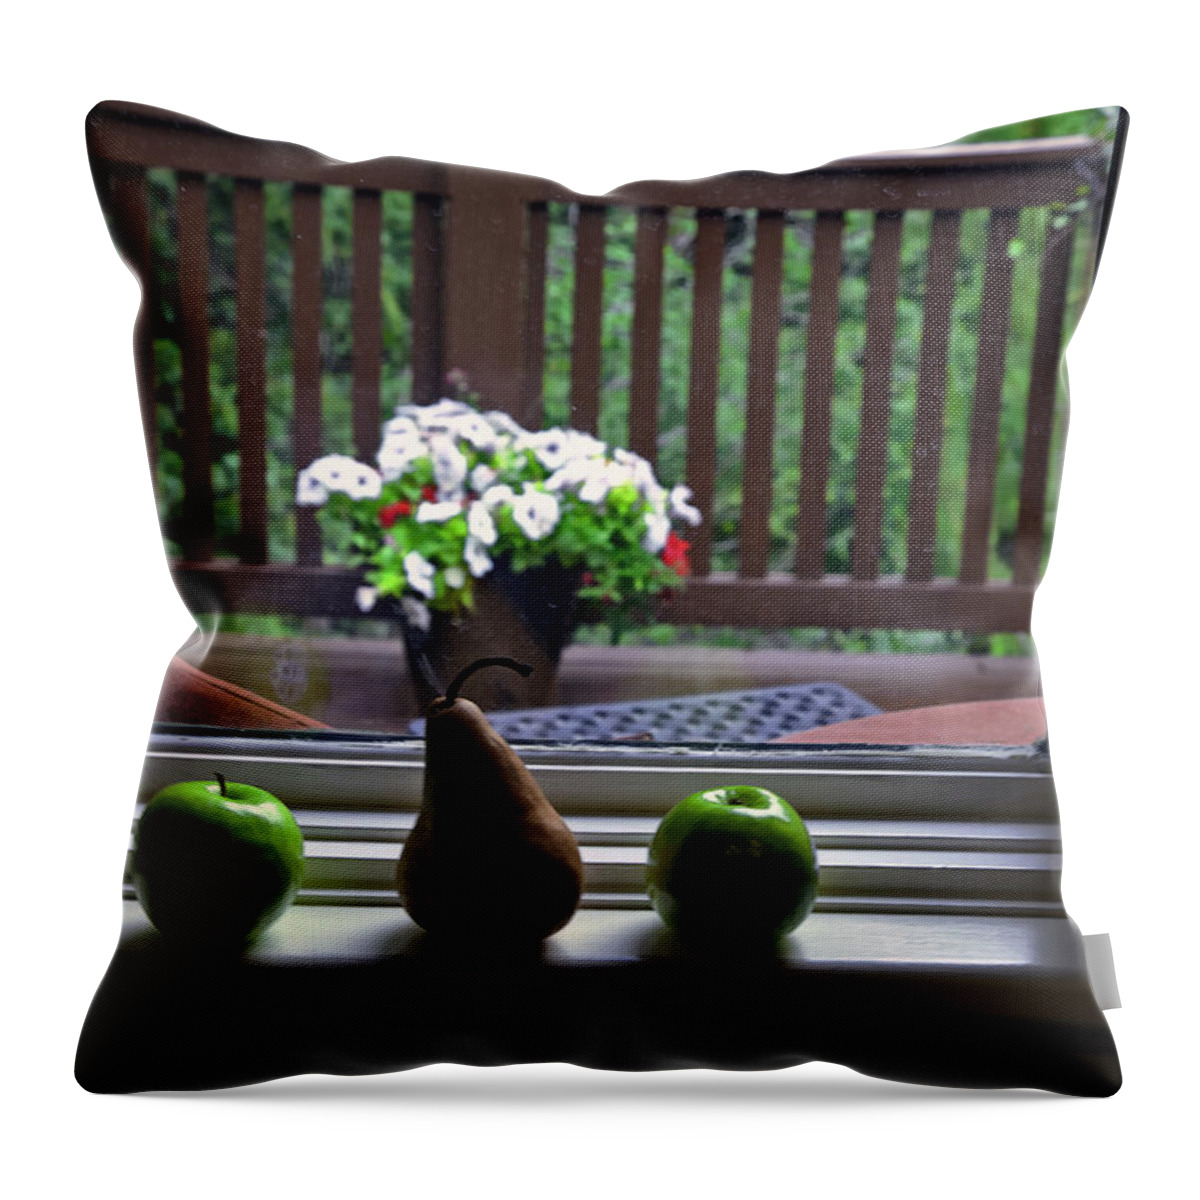 Still Life Throw Pillow featuring the photograph Window Sill 4 by Madeline Ellis